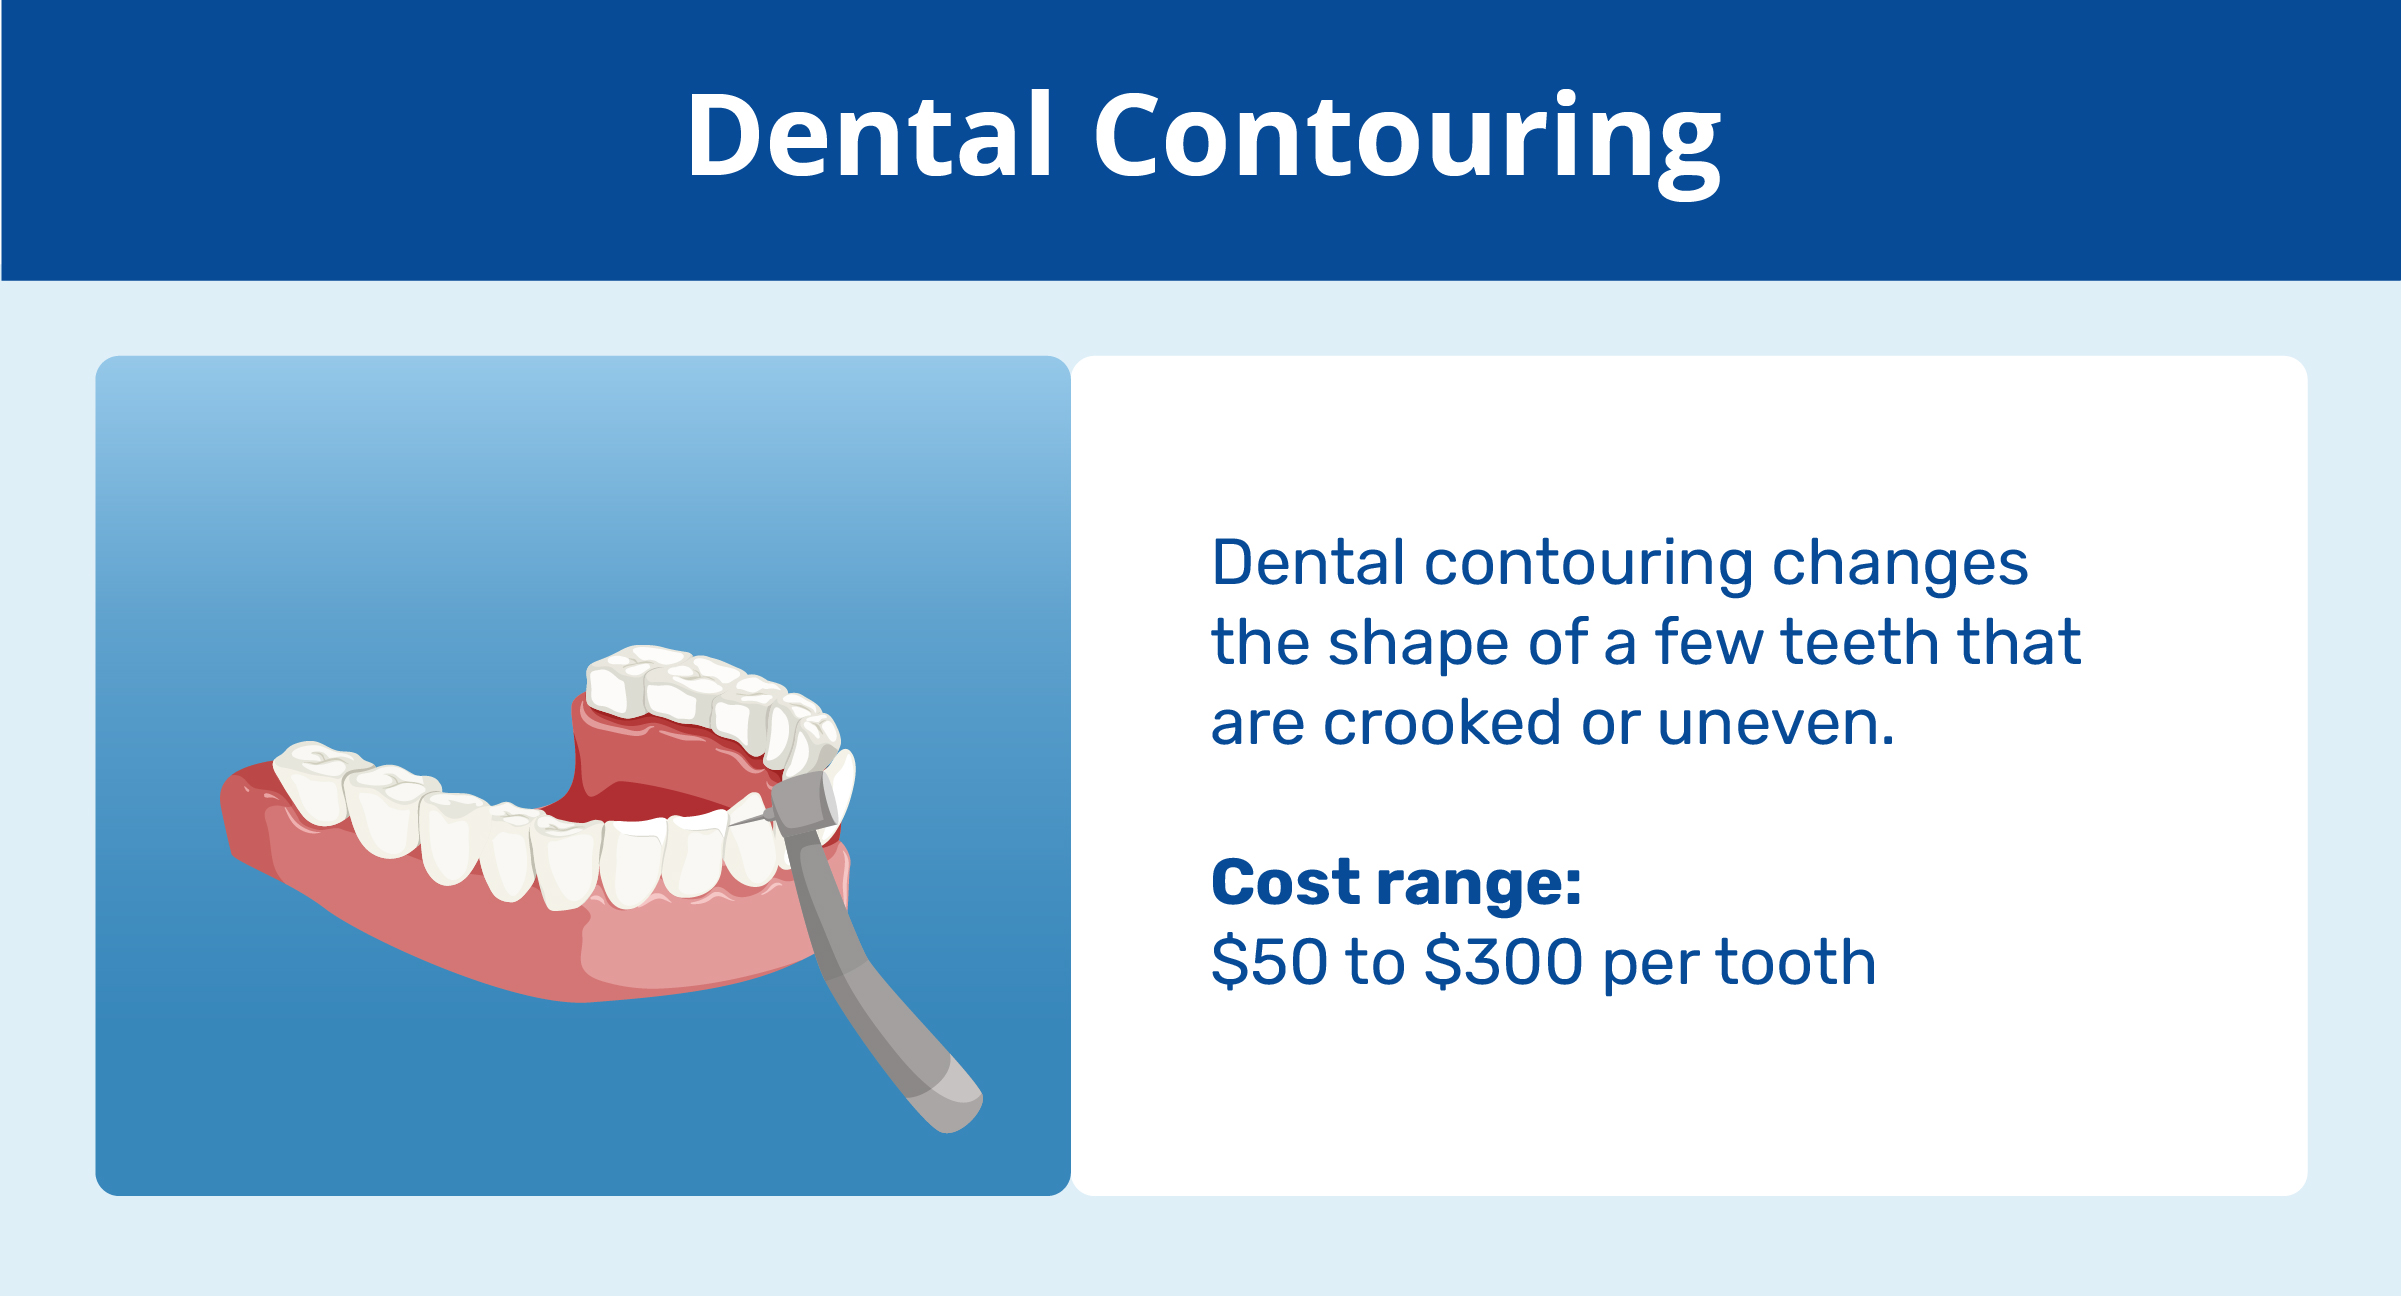 dental contouring and cost range